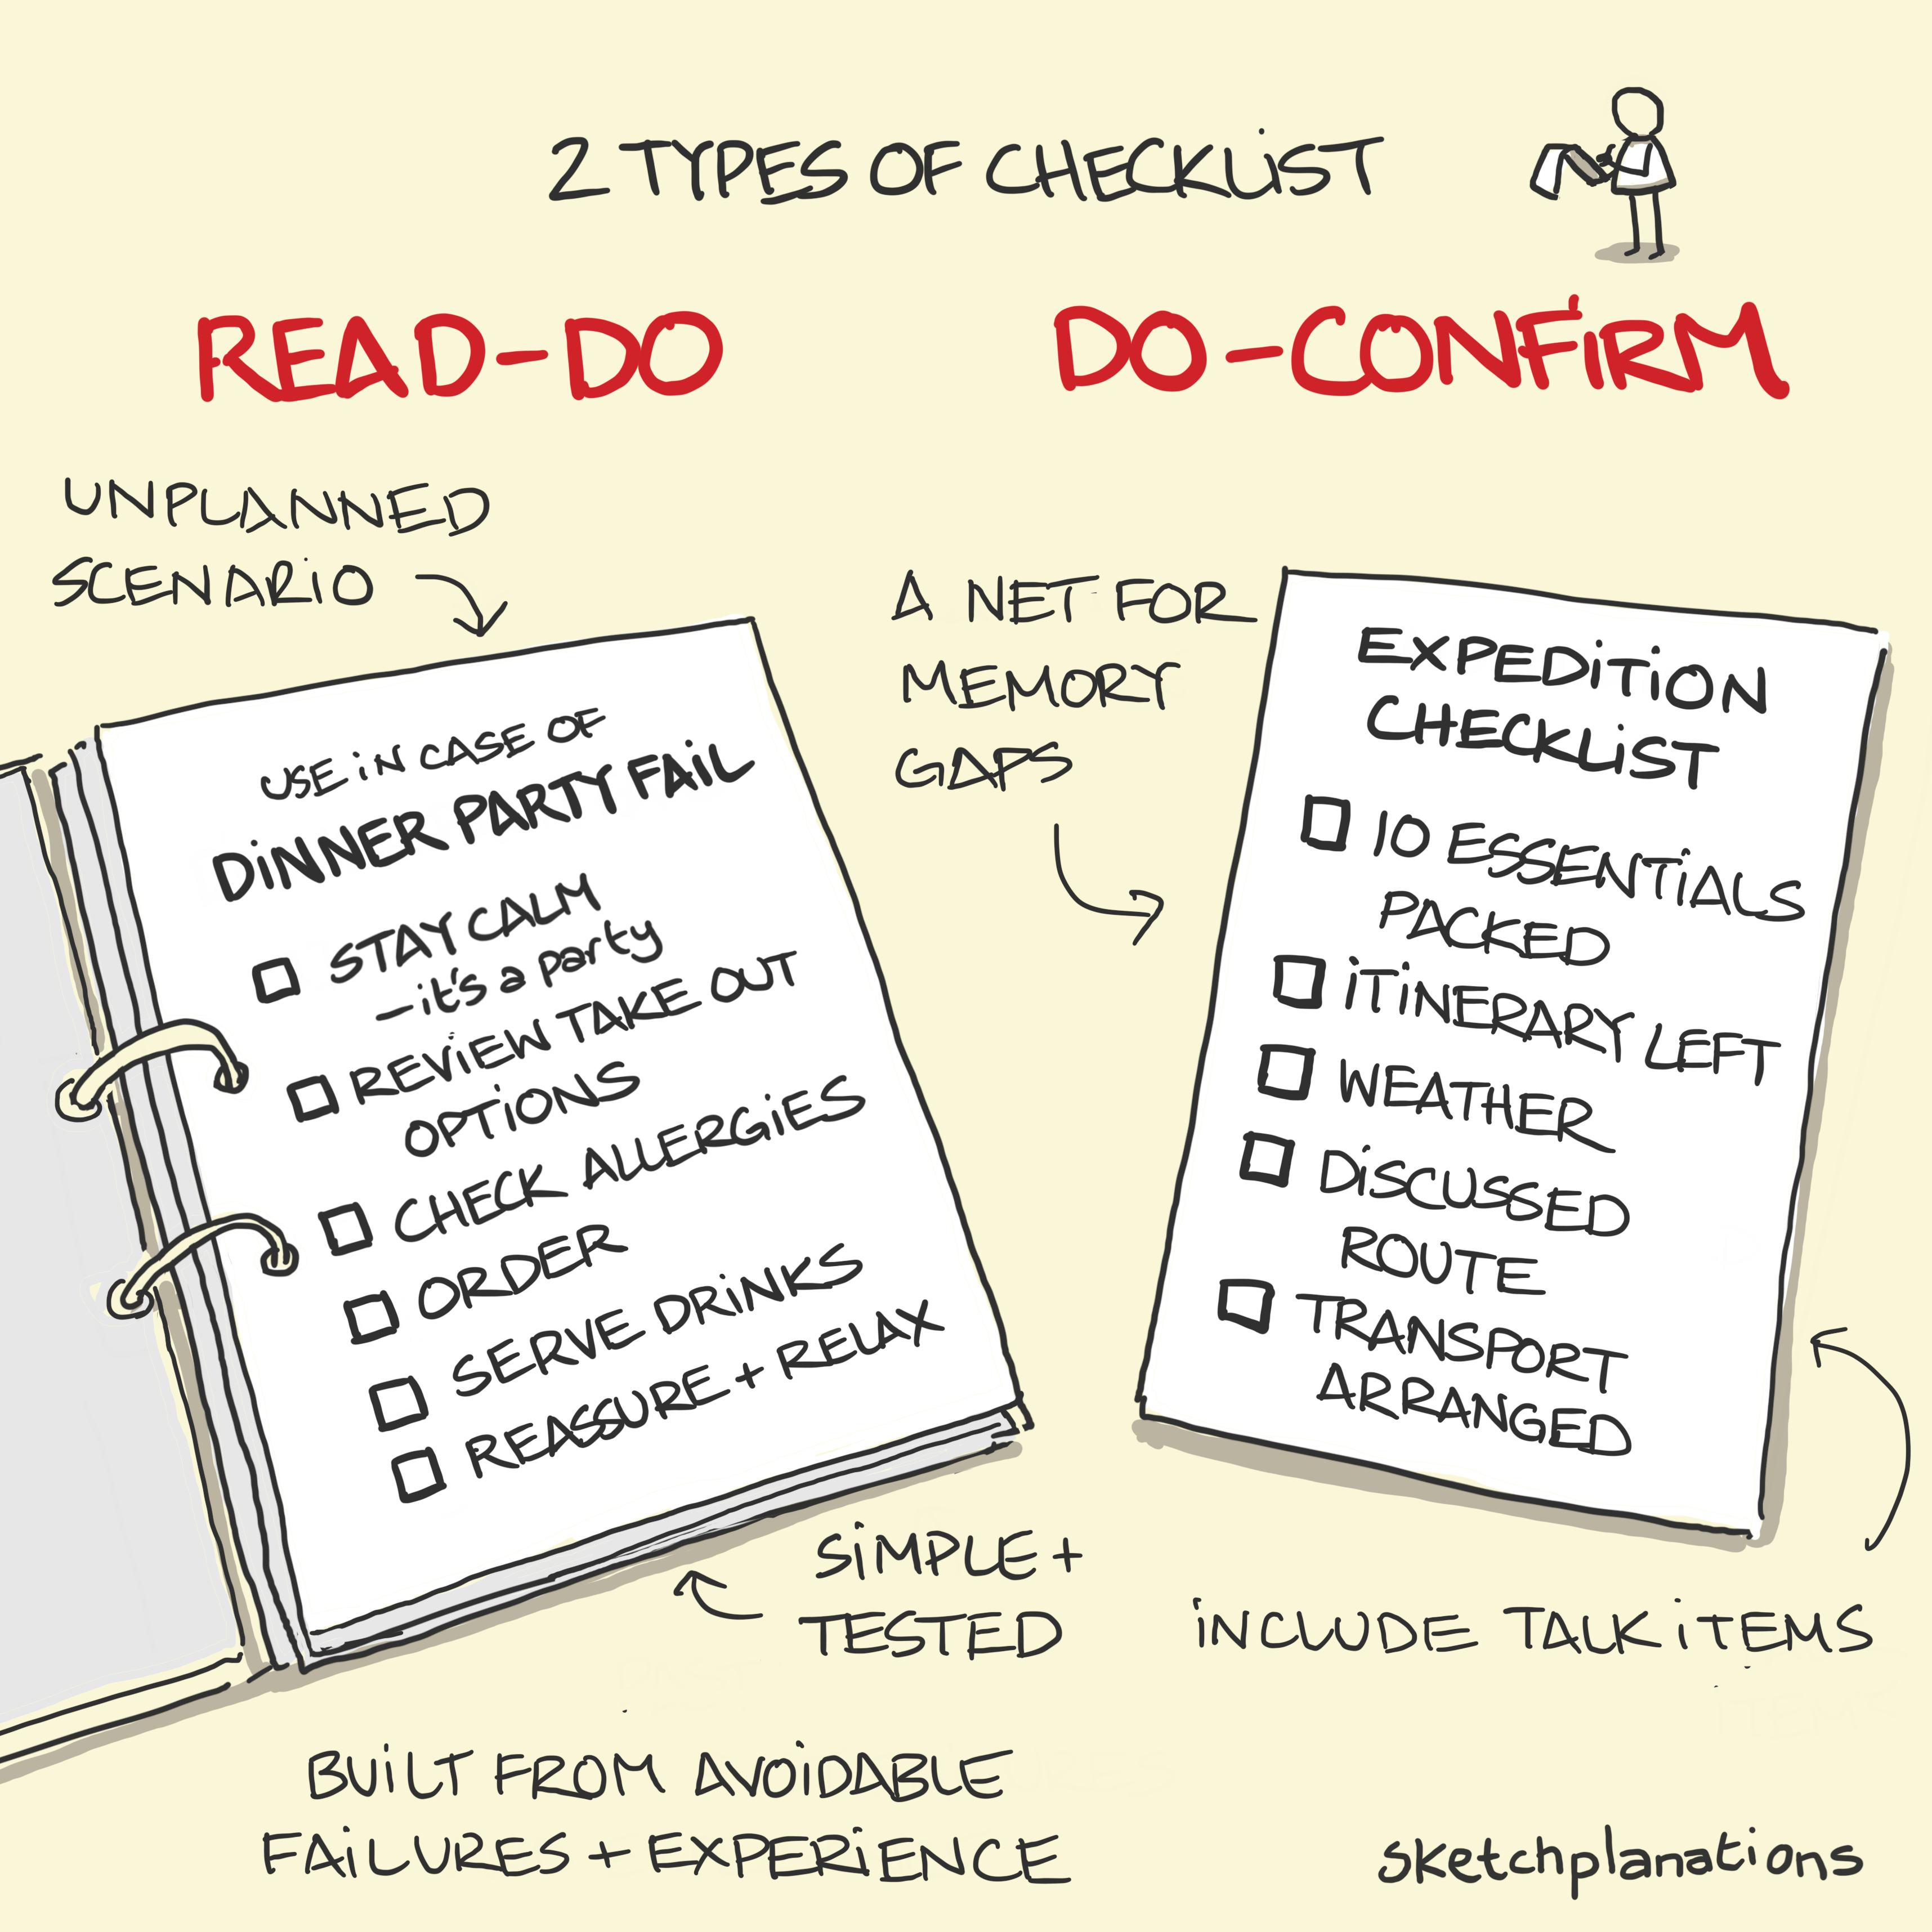 Read-Do and Do-Confirm checklists illustration: examples of a Dinner party fail and an Expedition checklist